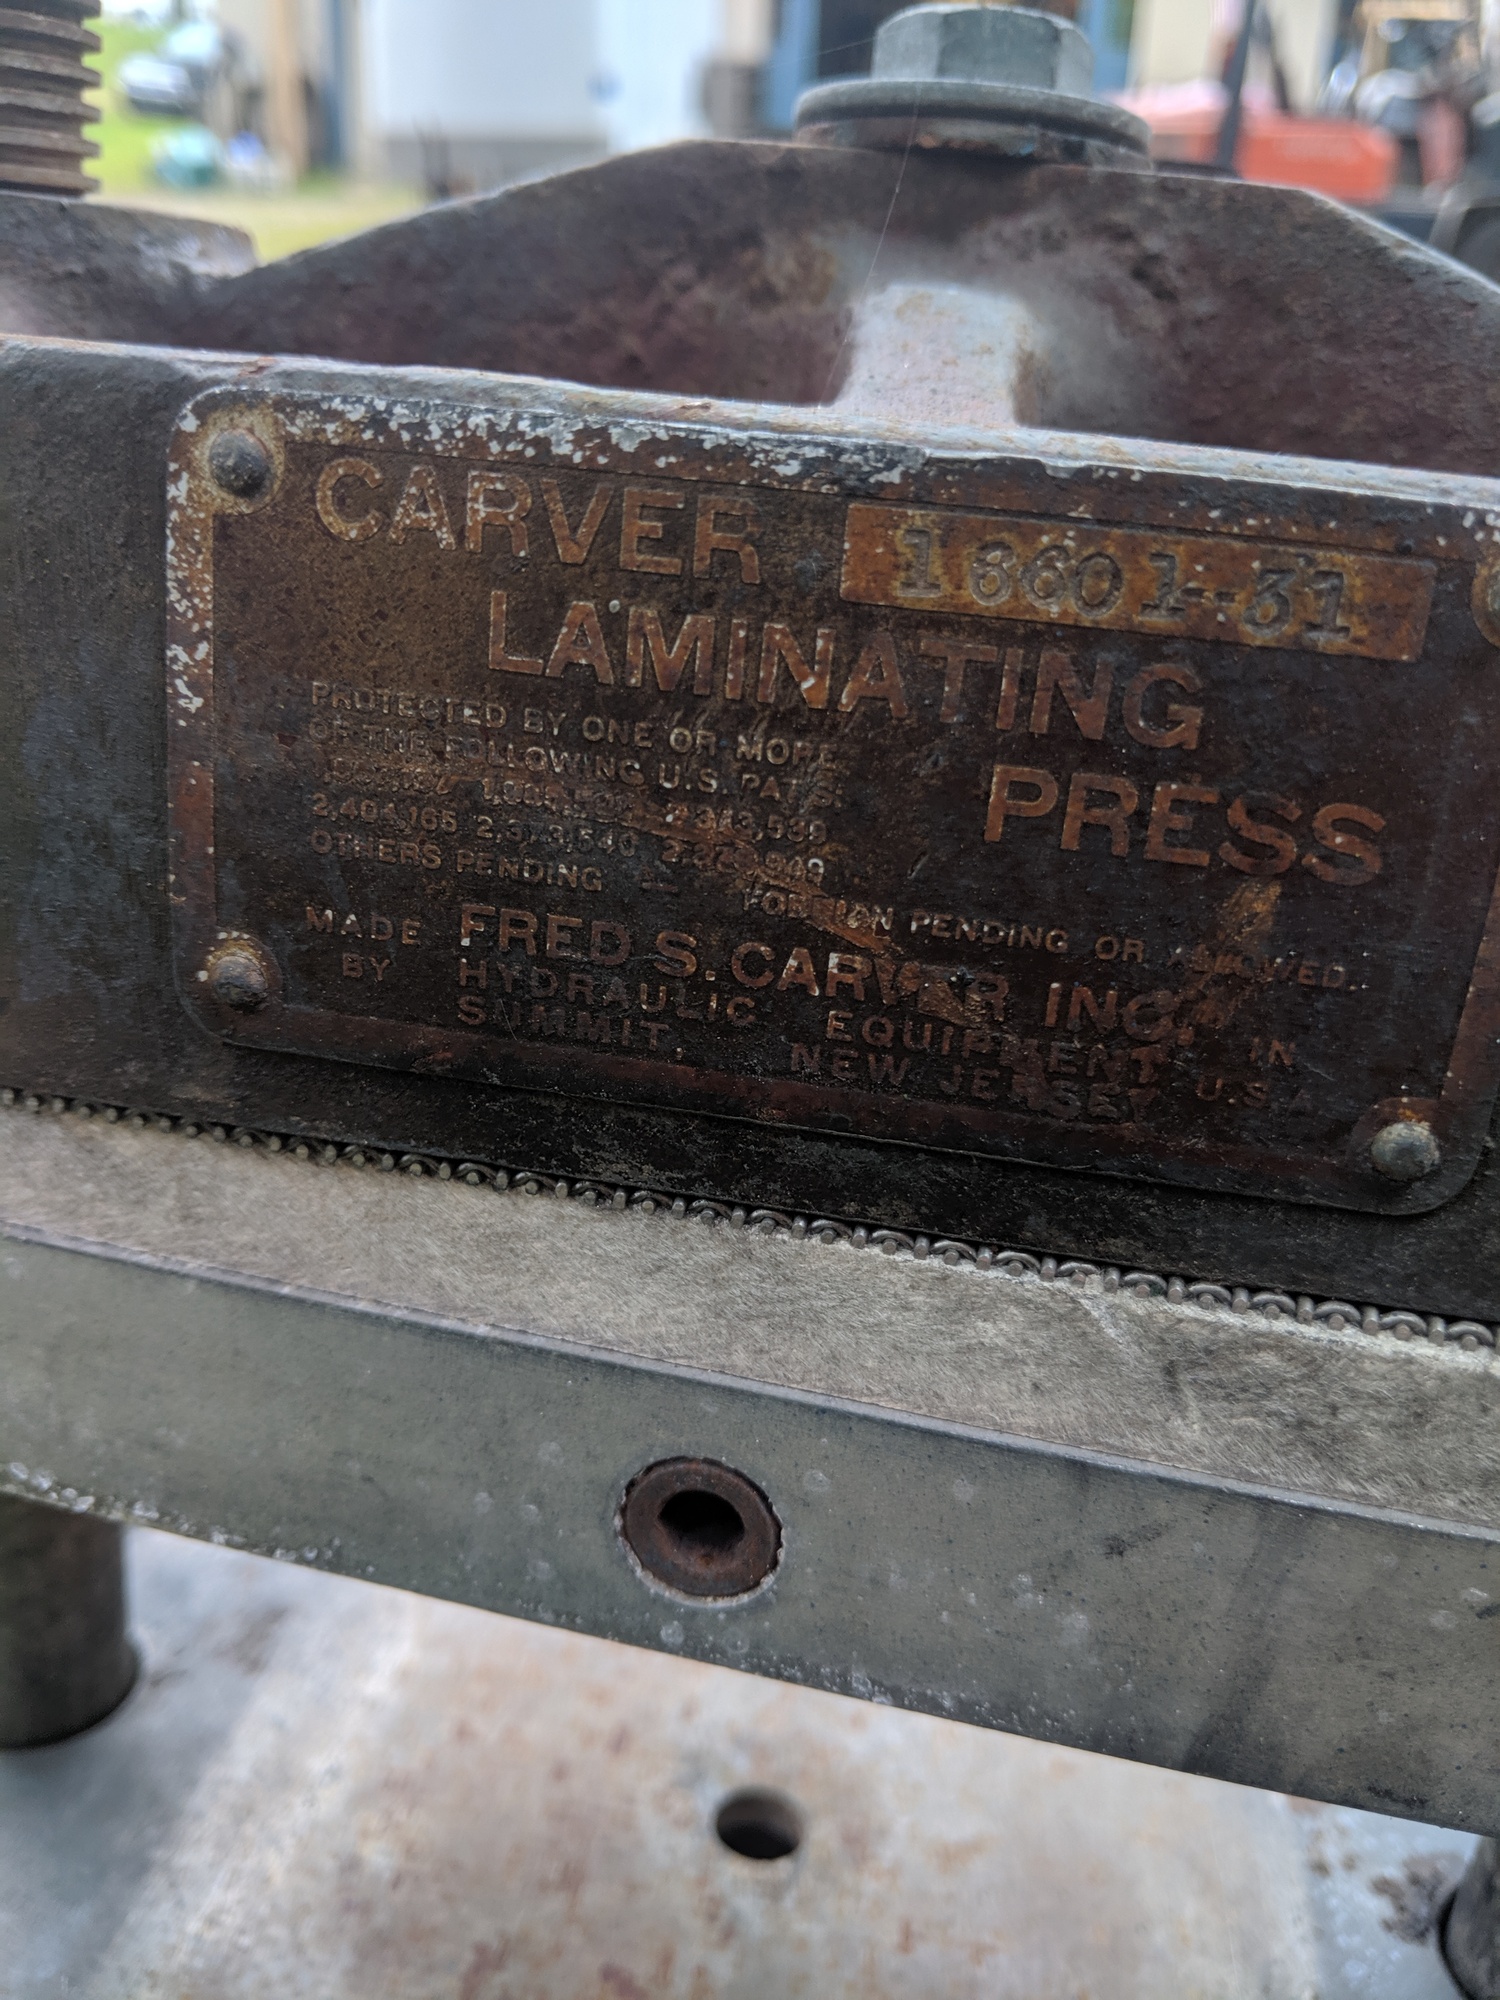 CARVER _UNKNOWN_ Presses Hydraulic | The Pelletizer Group